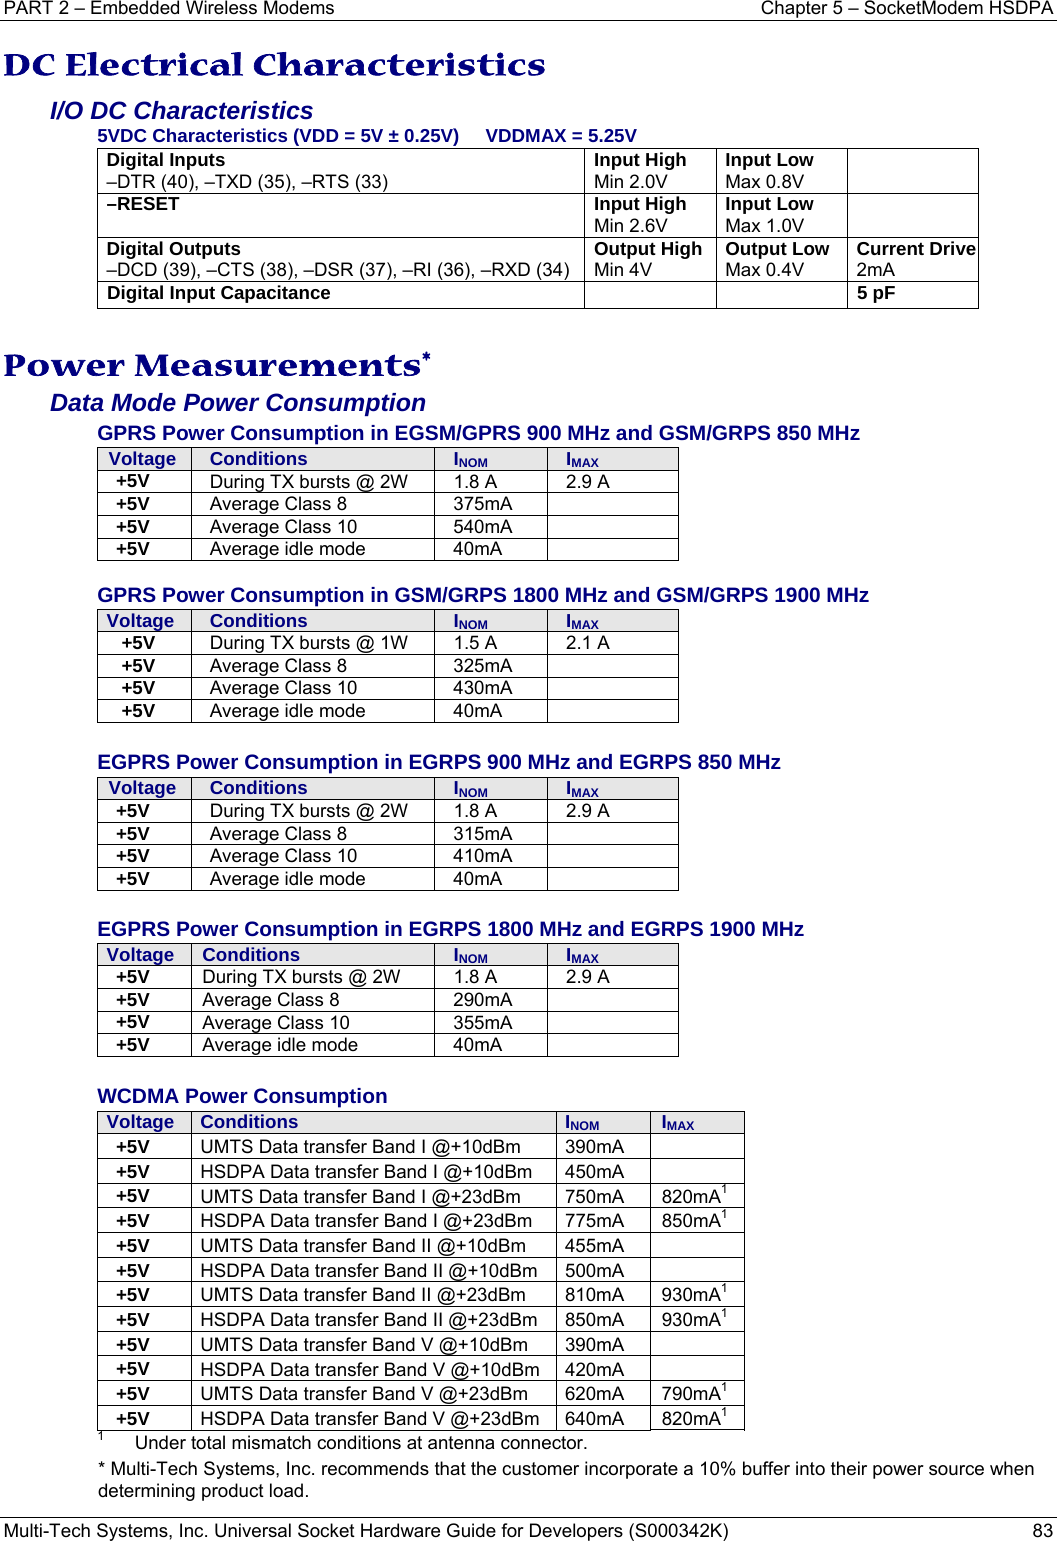 PART 2 – Embedded Wireless Modems  Chapter 5 – SocketModem HSDPA Multi-Tech Systems, Inc. Universal Socket Hardware Guide for Developers (S000342K)  83  DC Electrical Characteristics I/O DC Characteristics 5VDC Characteristics (VDD = 5V ± 0.25V)     VDDMAX = 5.25V   Digital Inputs –DTR (40), –TXD (35), –RTS (33)  Input HighMin 2.0VInput Low Max 0.8V  –RESET   Input HighMin 2.6V Input Low Max 1.0V  Digital Outputs –DCD (39), –CTS (38), –DSR (37), –RI (36), –RXD (34)Output HighMin 4VOutput Low Max 0.4V Current Drive 2mA Digital Input Capacitance    5 pF    Power Measurements* Data Mode Power Consumption  GPRS Power Consumption in EGSM/GPRS 900 MHz and GSM/GRPS 850 MHz   Voltage Conditions  INOM IMAX+5V  During TX bursts @ 2W  1.8 A   2.9 A  +5V  Average Class 8  375mA   +5V  Average Class 10  540mA   +5V  Average idle mode  40mA    GPRS Power Consumption in GSM/GRPS 1800 MHz and GSM/GRPS 1900 MHz Voltage Conditions  INOM IMAX+5V  During TX bursts @ 1W  1.5 A  2.1 A  +5V  Average Class 8  325mA   +5V  Average Class 10  430mA   +5V  Average idle mode  40mA    EGPRS Power Consumption in EGRPS 900 MHz and EGRPS 850 MHz Voltage Conditions  INOM IMAX+5V  During TX bursts @ 2W  1.8 A   2.9 A  +5V  Average Class 8  315mA   +5V  Average Class 10  410mA   +5V  Average idle mode  40mA    EGPRS Power Consumption in EGRPS 1800 MHz and EGRPS 1900 MHz Voltage Conditions  INOM IMAX+5V  During TX bursts @ 2W  1.8 A   2.9 A  +5V  Average Class 8  290mA   +5V  Average Class 10  355mA   +5V  Average idle mode  40mA    WCDMA Power Consumption Voltage Conditions  INOM IMAX+5V  UMTS Data transfer Band I @+10dBm  390mA   +5V  HSDPA Data transfer Band I @+10dBm  450mA   +5V  UMTS Data transfer Band I @+23dBm  750mA  820mA1 +5V  HSDPA Data transfer Band I @+23dBm  775mA  850mA1 +5V  UMTS Data transfer Band II @+10dBm  455mA   +5V  HSDPA Data transfer Band II @+10dBm  500mA   +5V  UMTS Data transfer Band II @+23dBm  810mA  930mA1 +5V  HSDPA Data transfer Band II @+23dBm  850mA  930mA1 +5V  UMTS Data transfer Band V @+10dBm  390mA   +5V  HSDPA Data transfer Band V @+10dBm  420mA   +5V  UMTS Data transfer Band V @+23dBm  620mA  790mA1 +5V  HSDPA Data transfer Band V @+23dBm  640mA  820mA1 1  Under total mismatch conditions at antenna connector. * Multi-Tech Systems, Inc. recommends that the customer incorporate a 10% buffer into their power source when determining product load. 